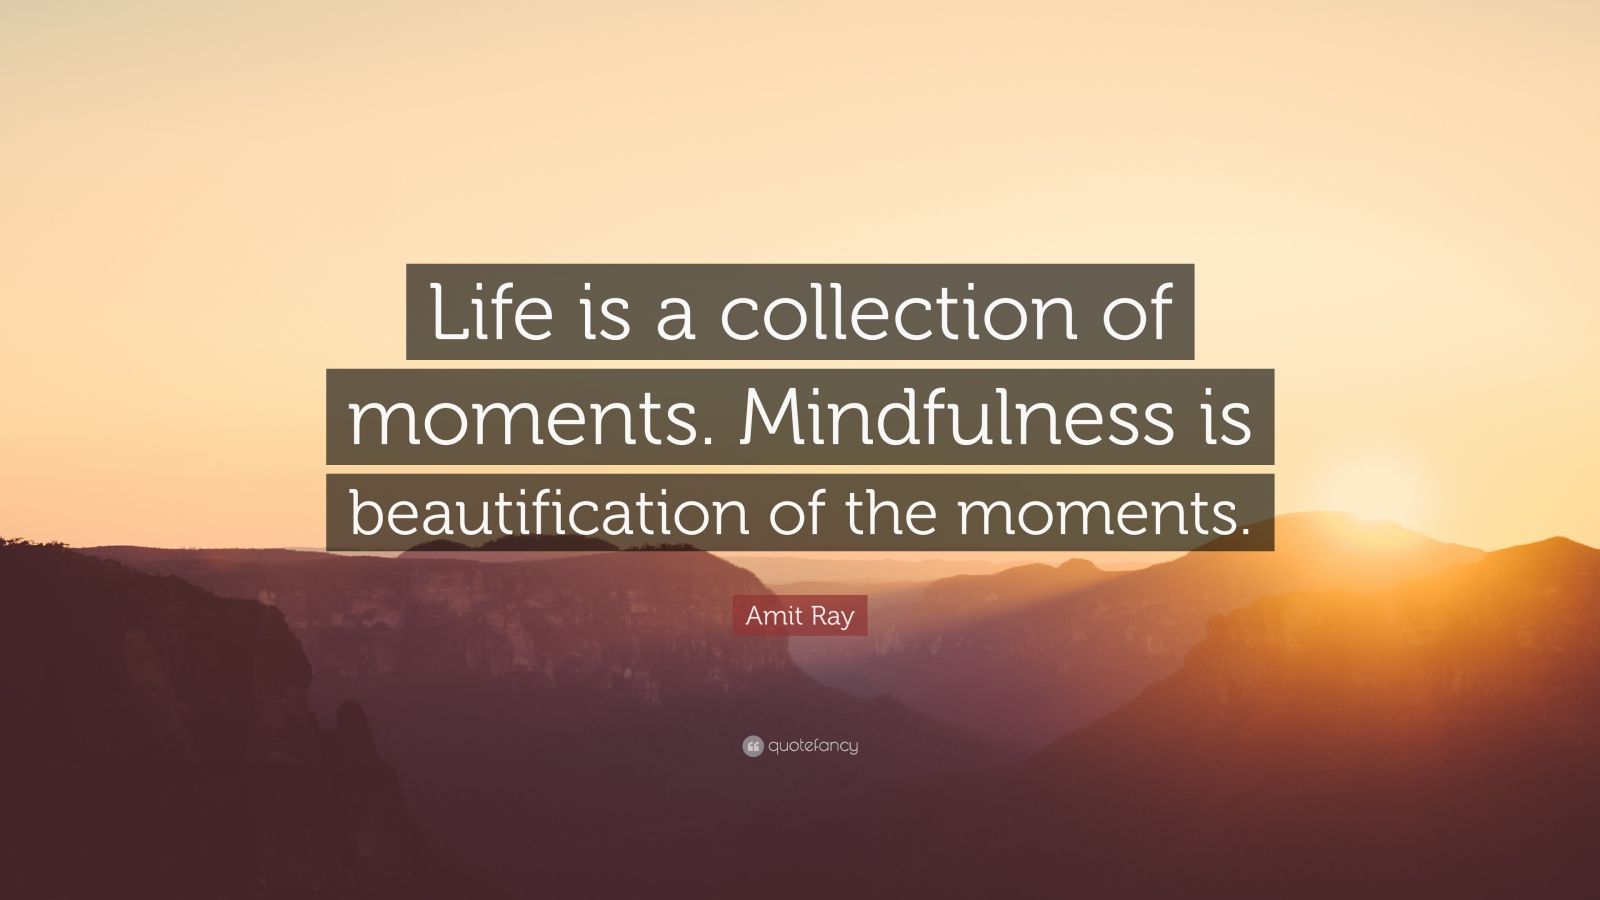 Amit Ray Quote: “Life is a collection of moments. Mindfulness is ...